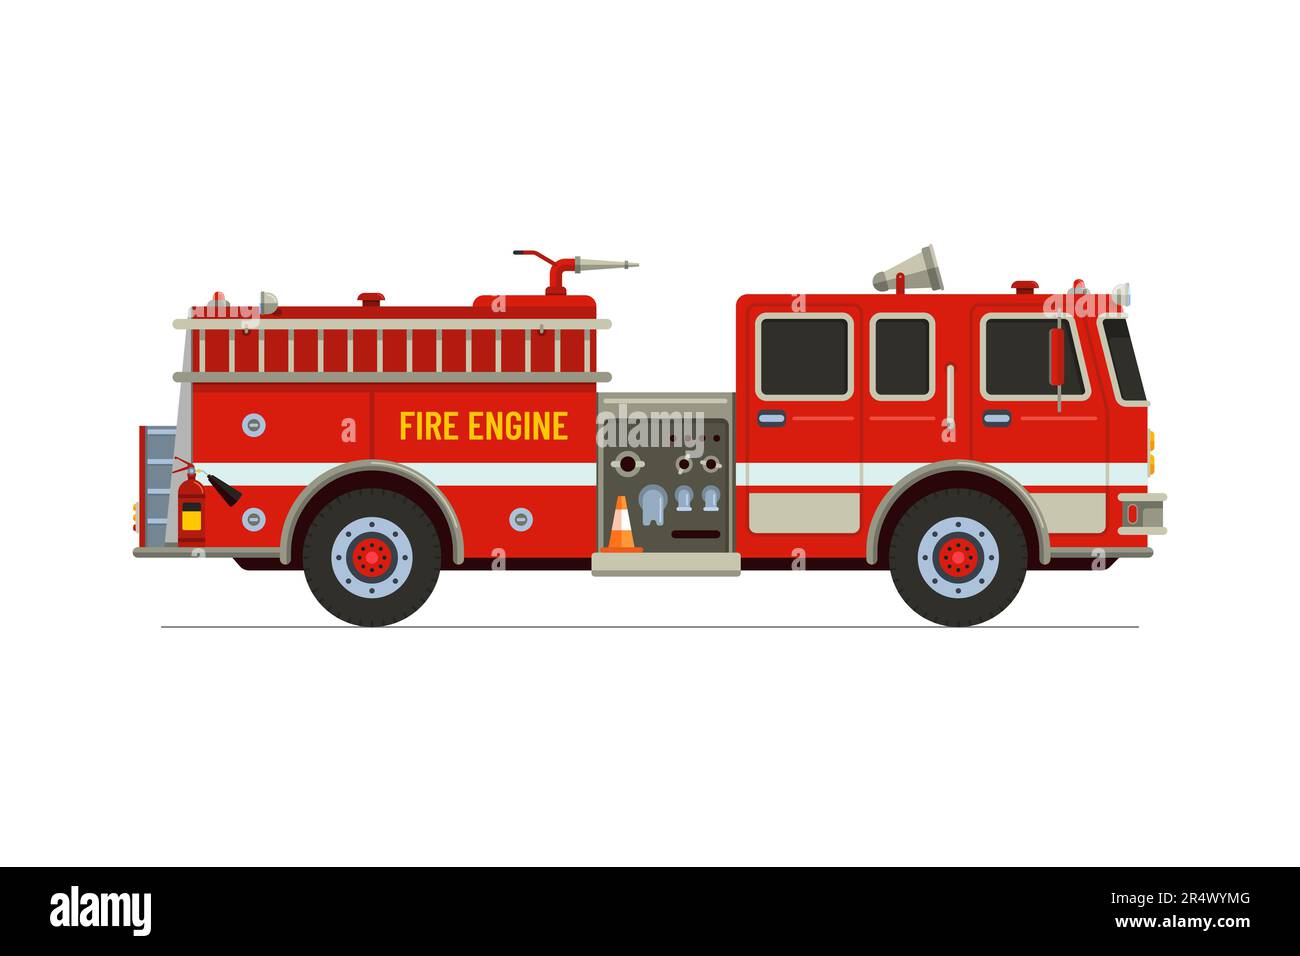 Fire engine truck front view. Firetruck car with Siren alarm and water tank. Firefighter red vehicle. Fireman emergency rescue transport. Firefighting lorry vector eps flat illustration Stock Vector